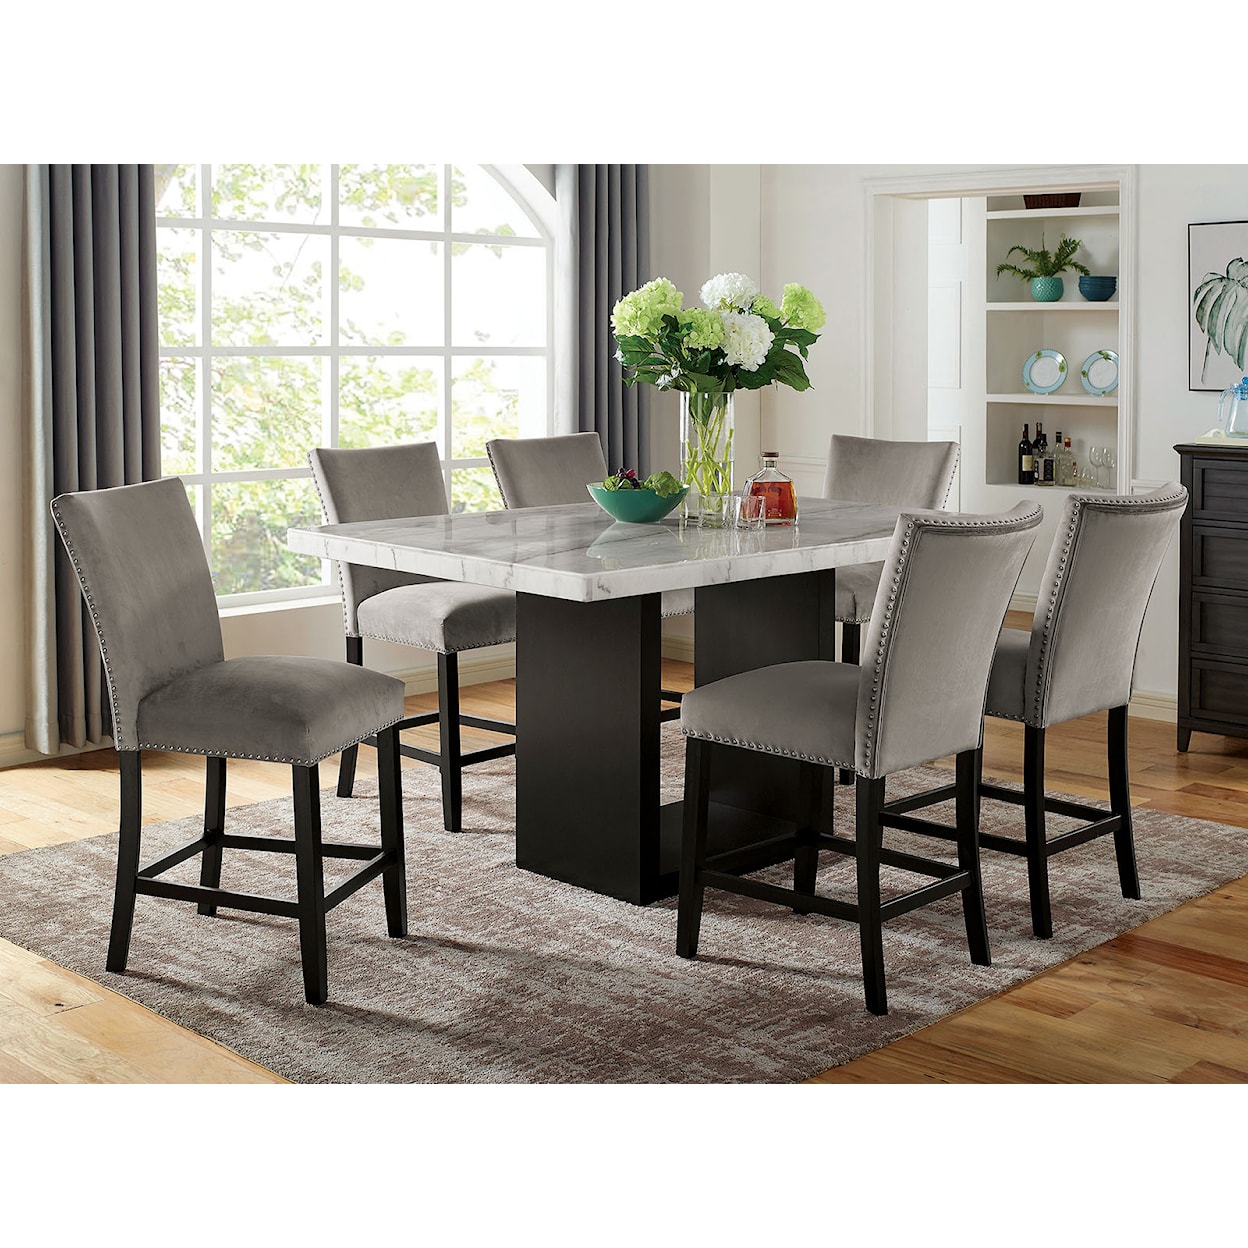 Furniture of America Kian Counter Height Dining Table